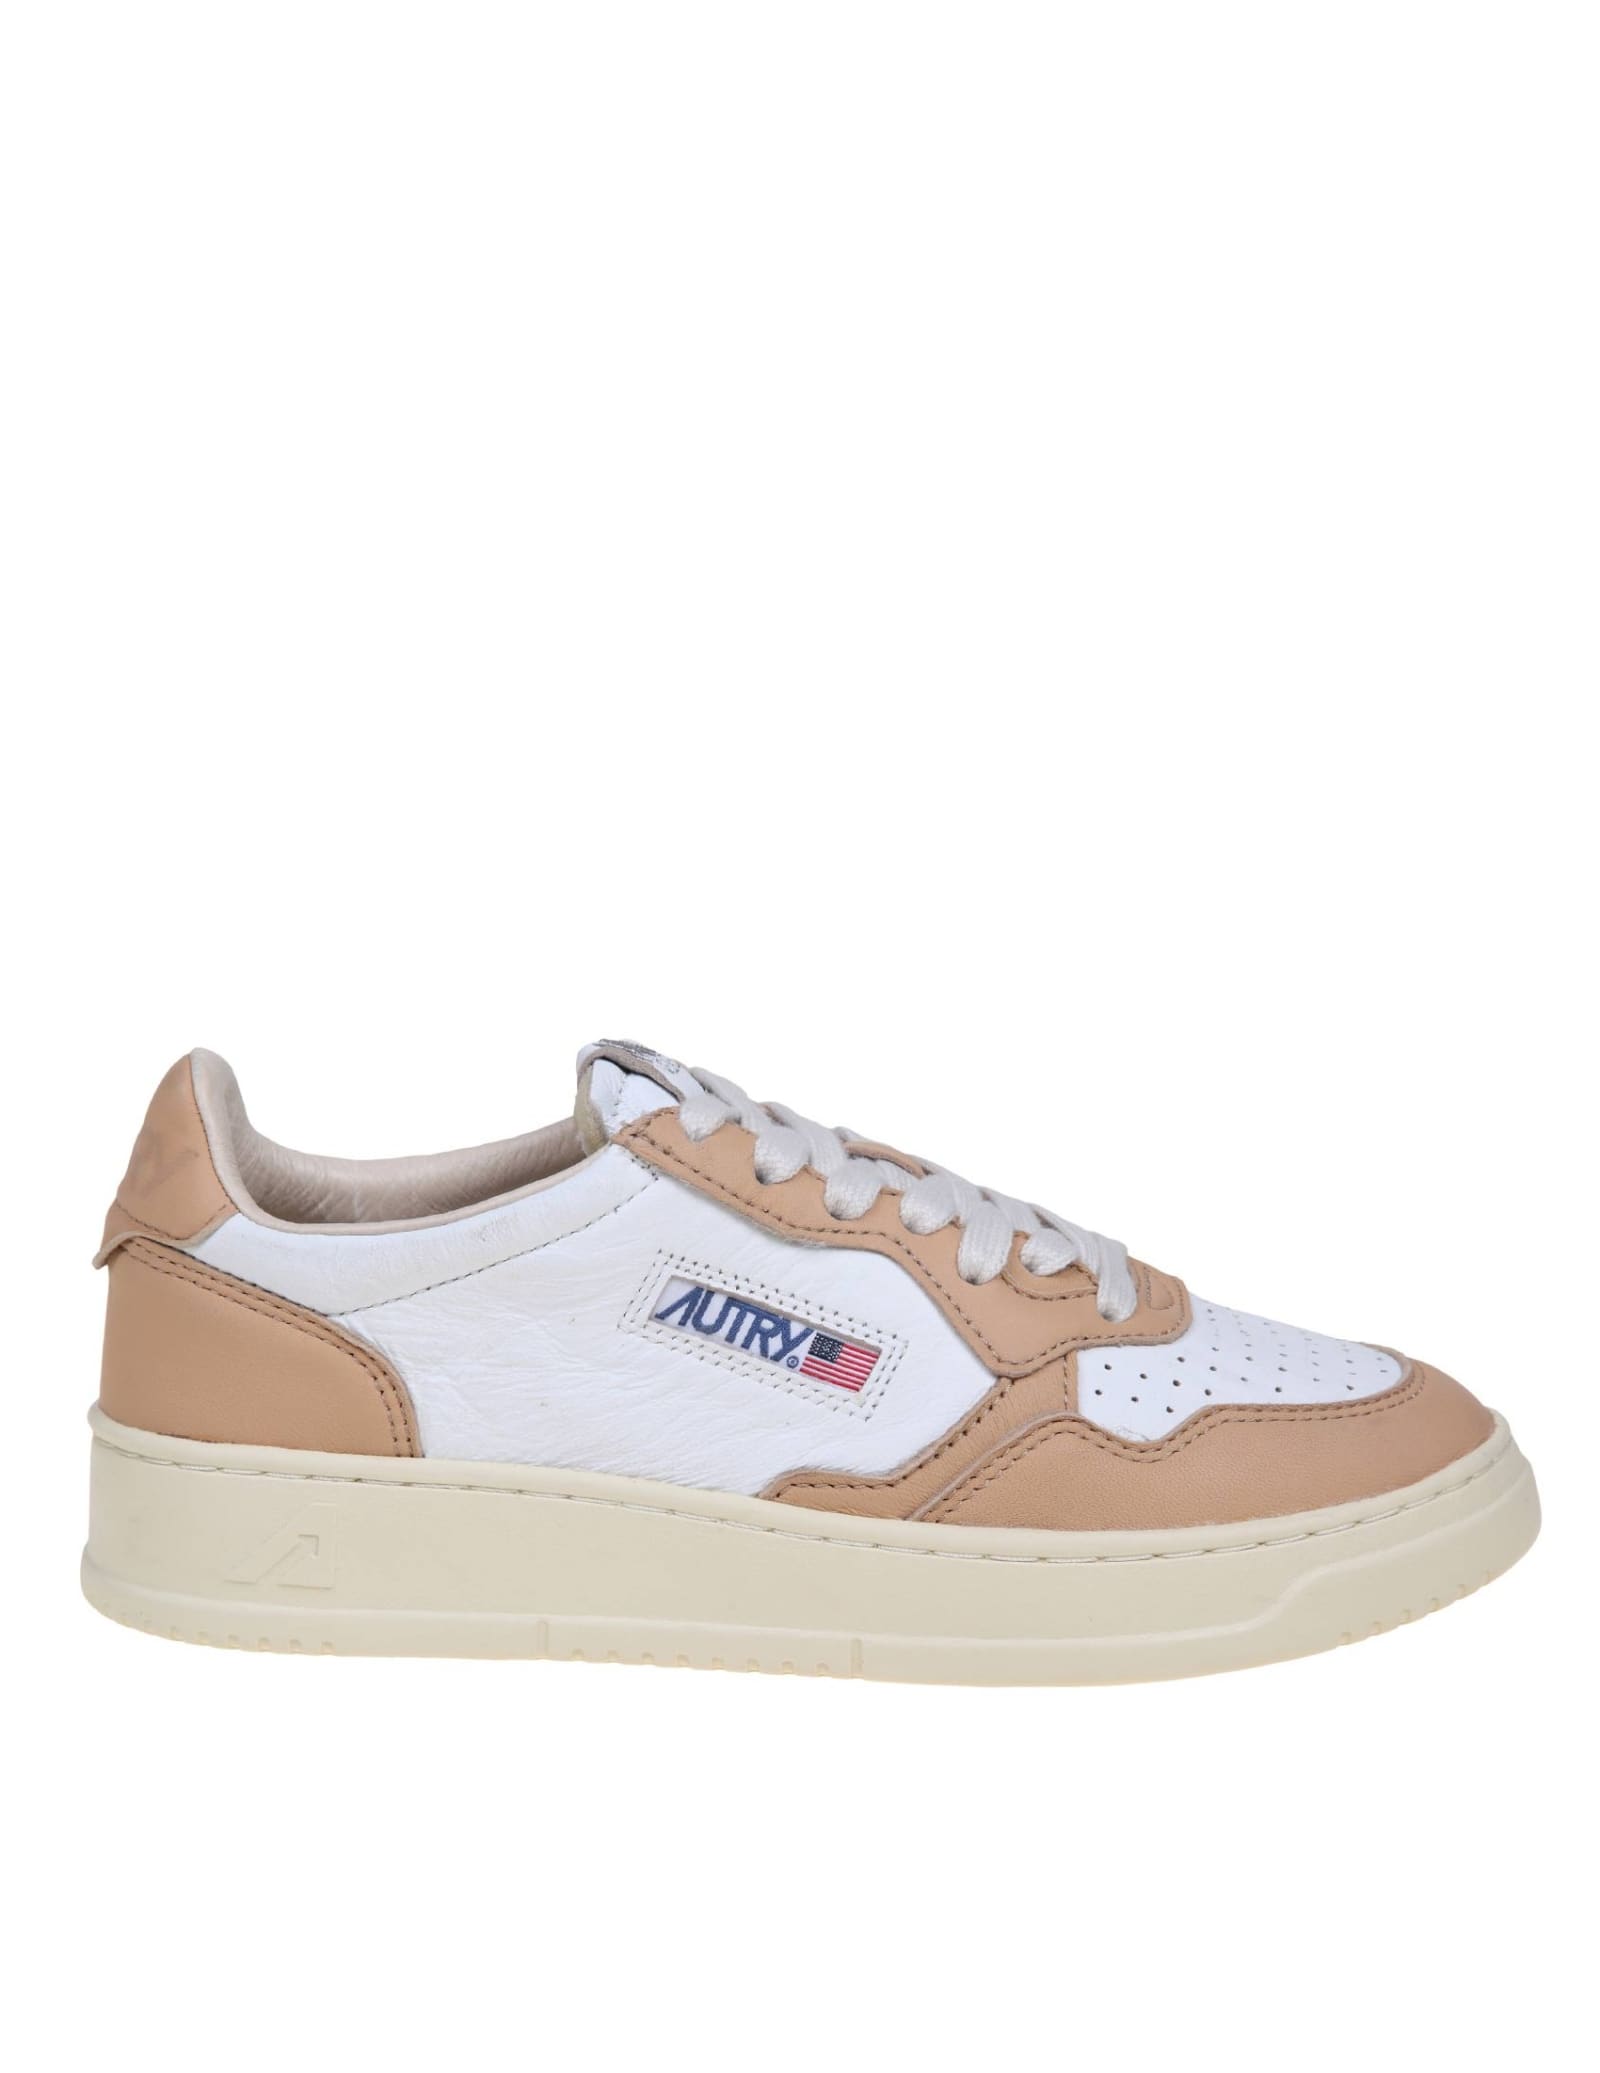 Shop Autry Sneakers In White And Caramel Leather In Beige